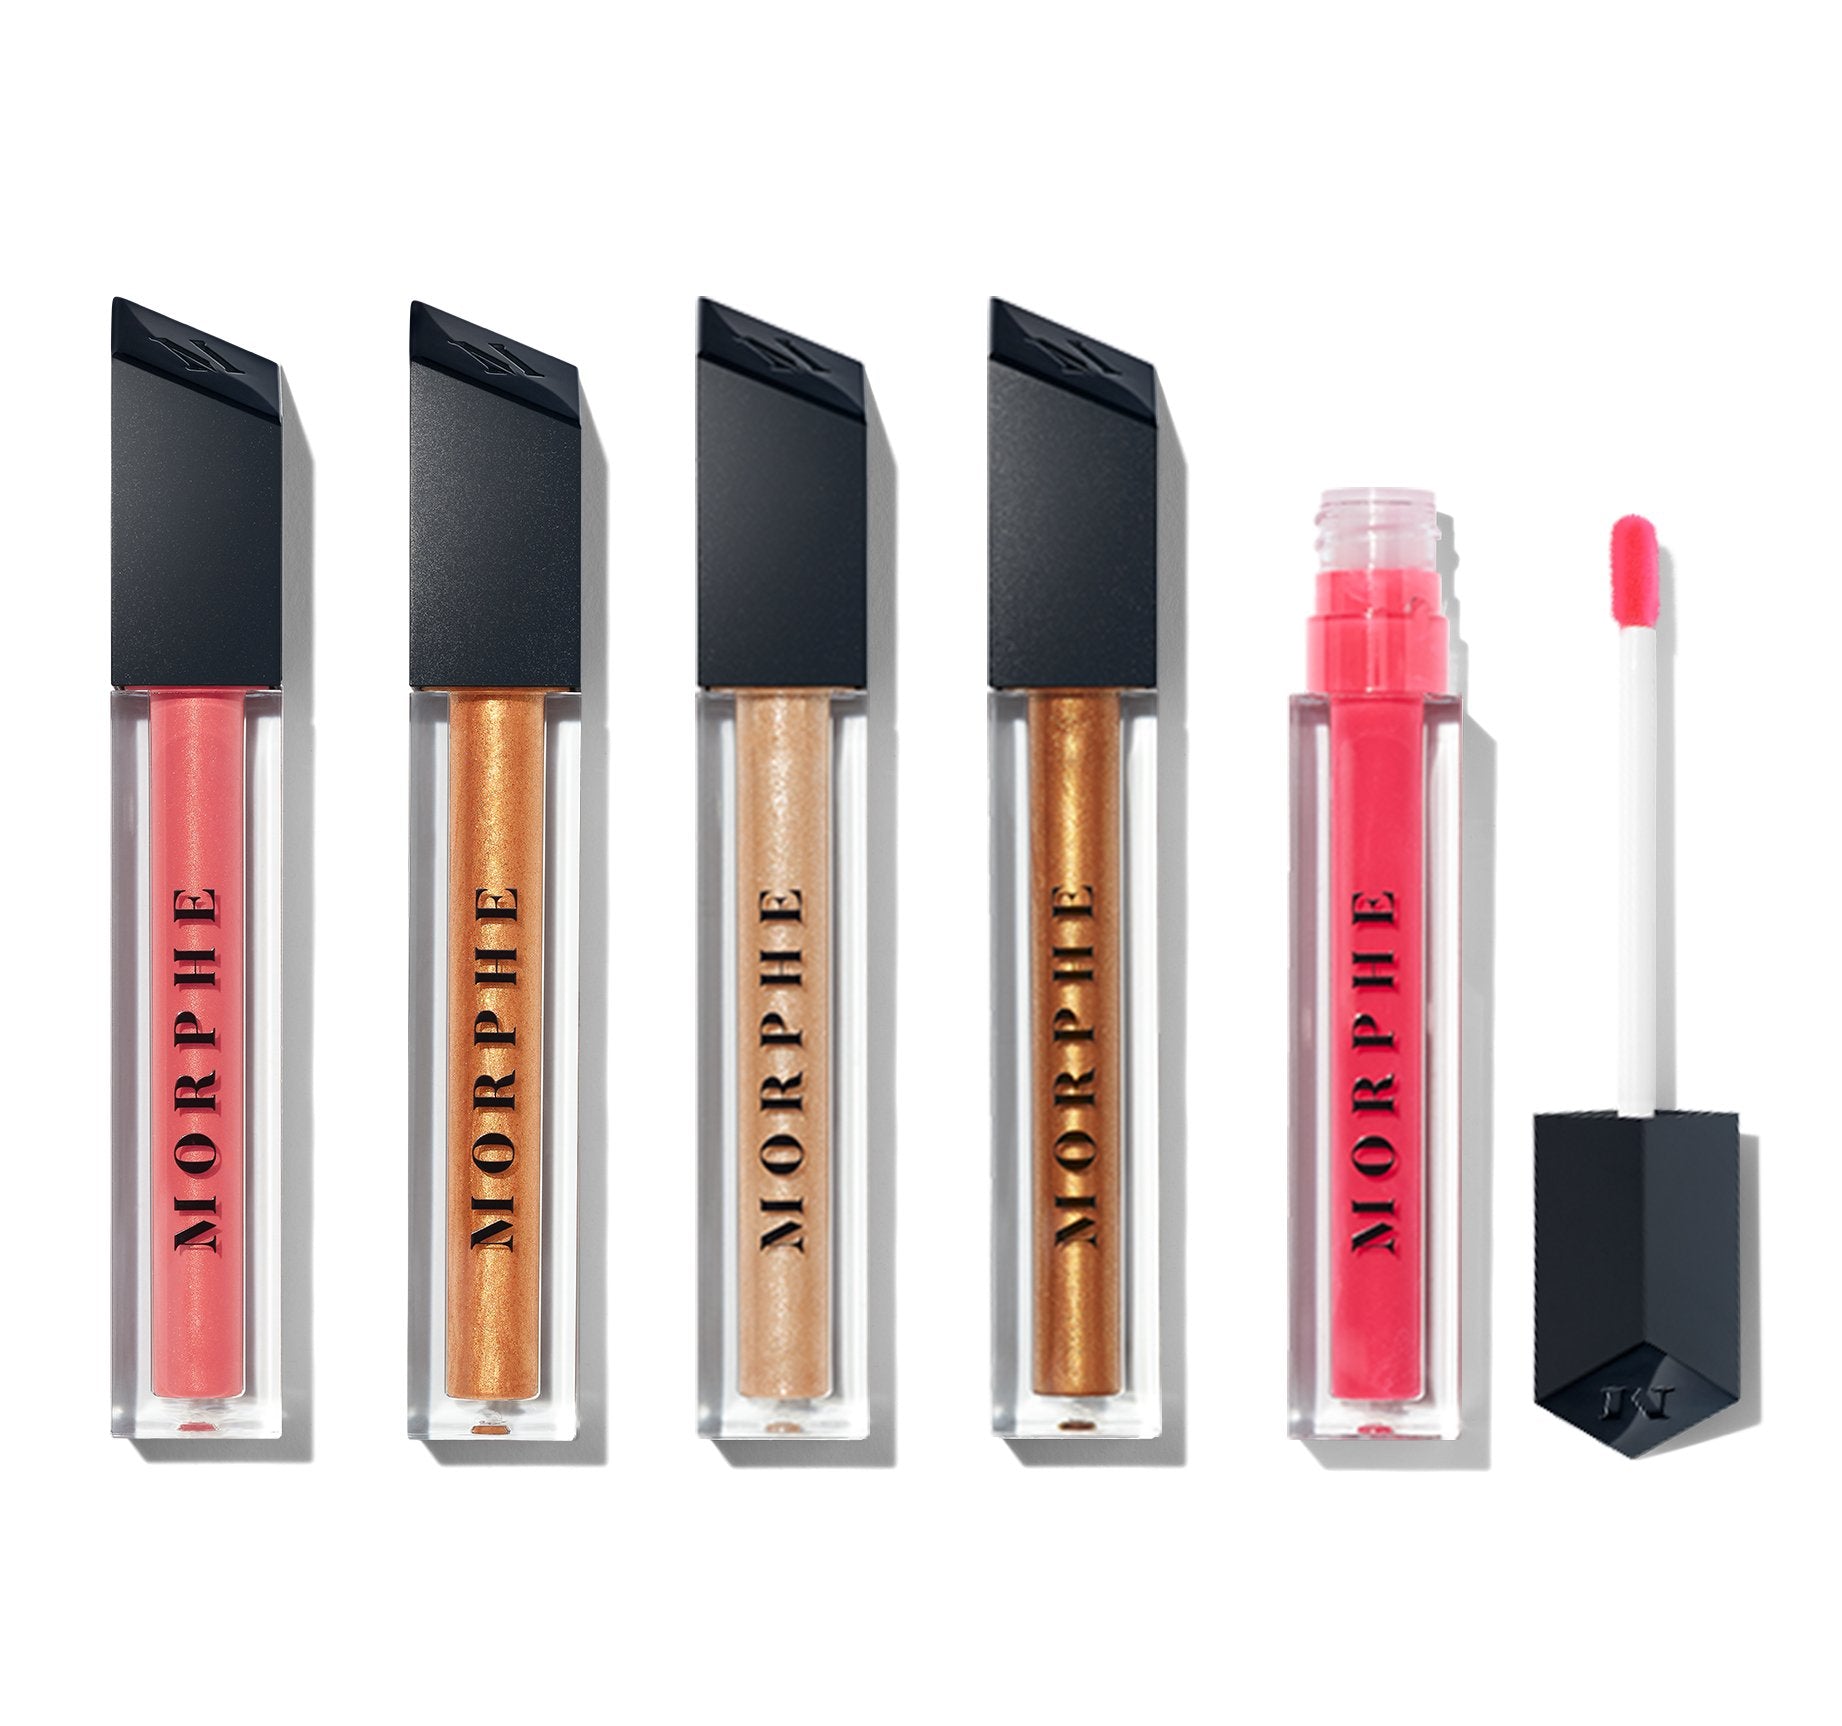 Hot Tropic Lip Gloss Collection